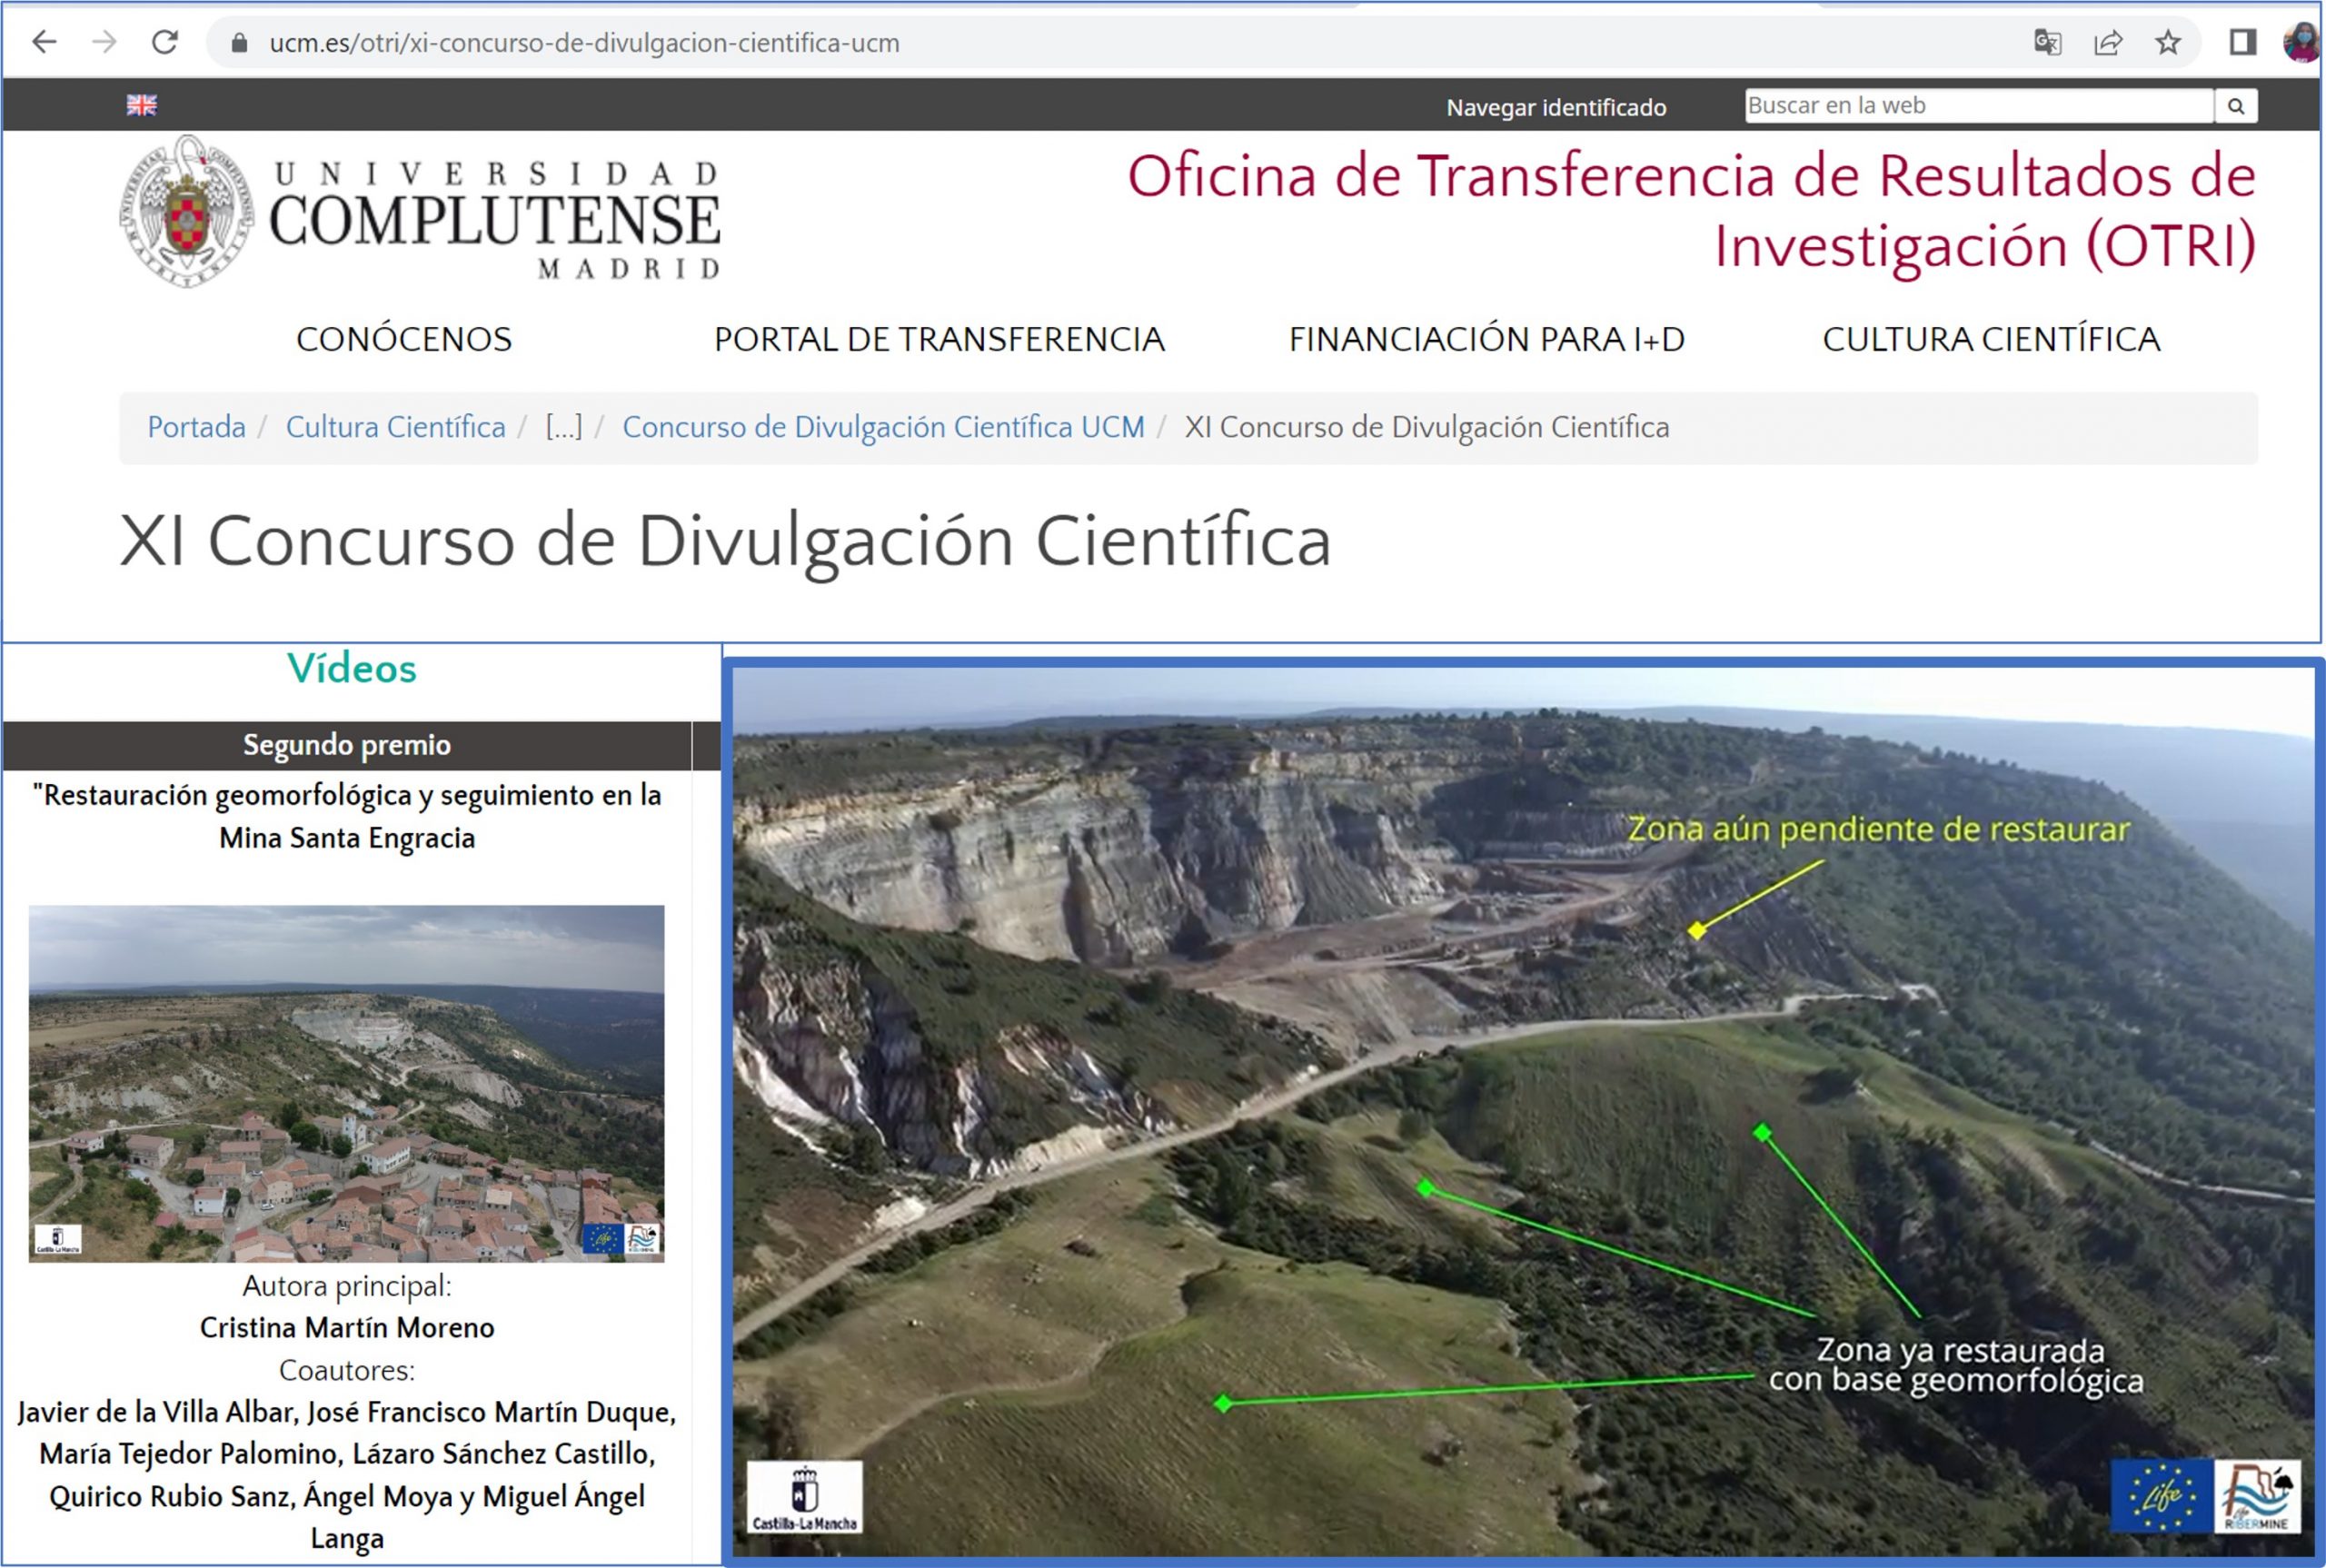 LIFE RIBERMINE video awarded in the “11th UCM Science Dissemination Contest”